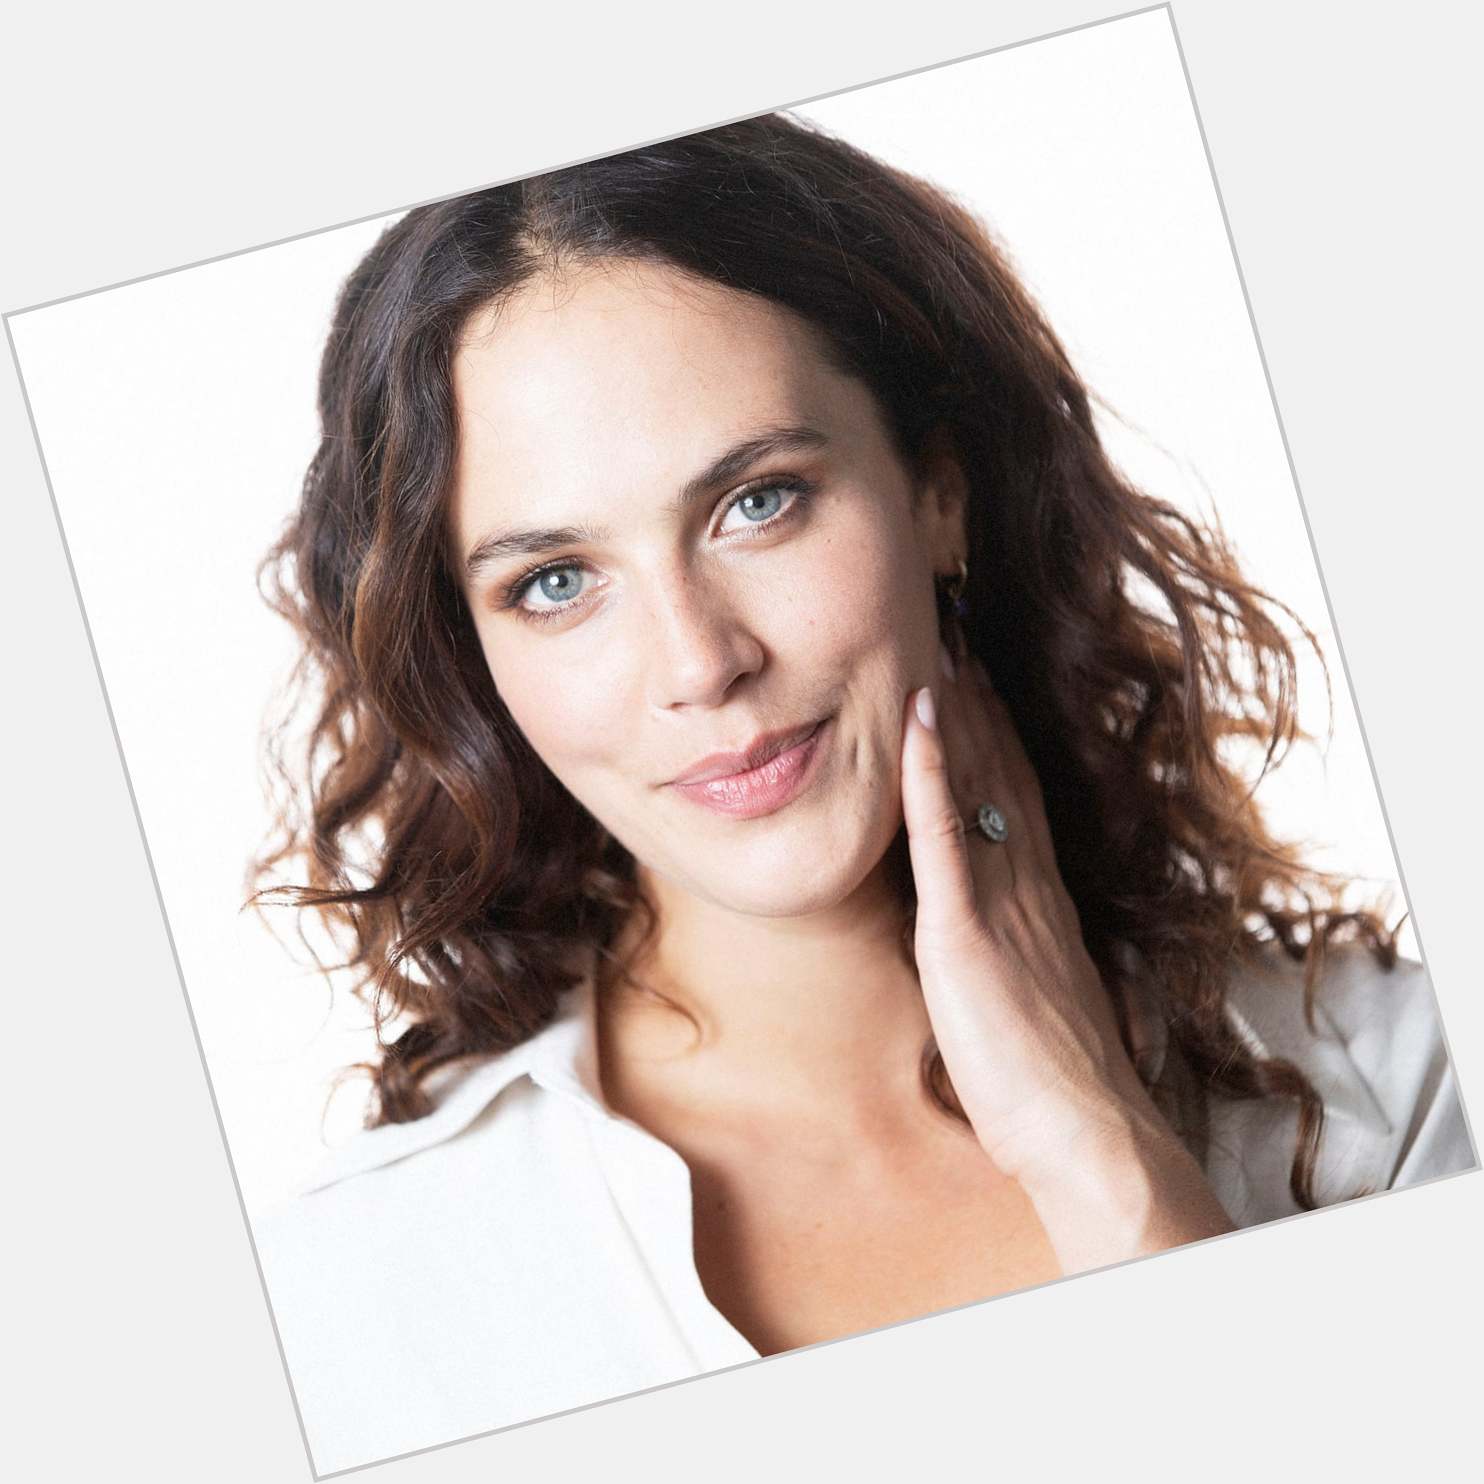 Happy Birthday to Lenore s voice actor, Jessica Brown Findlay!! 